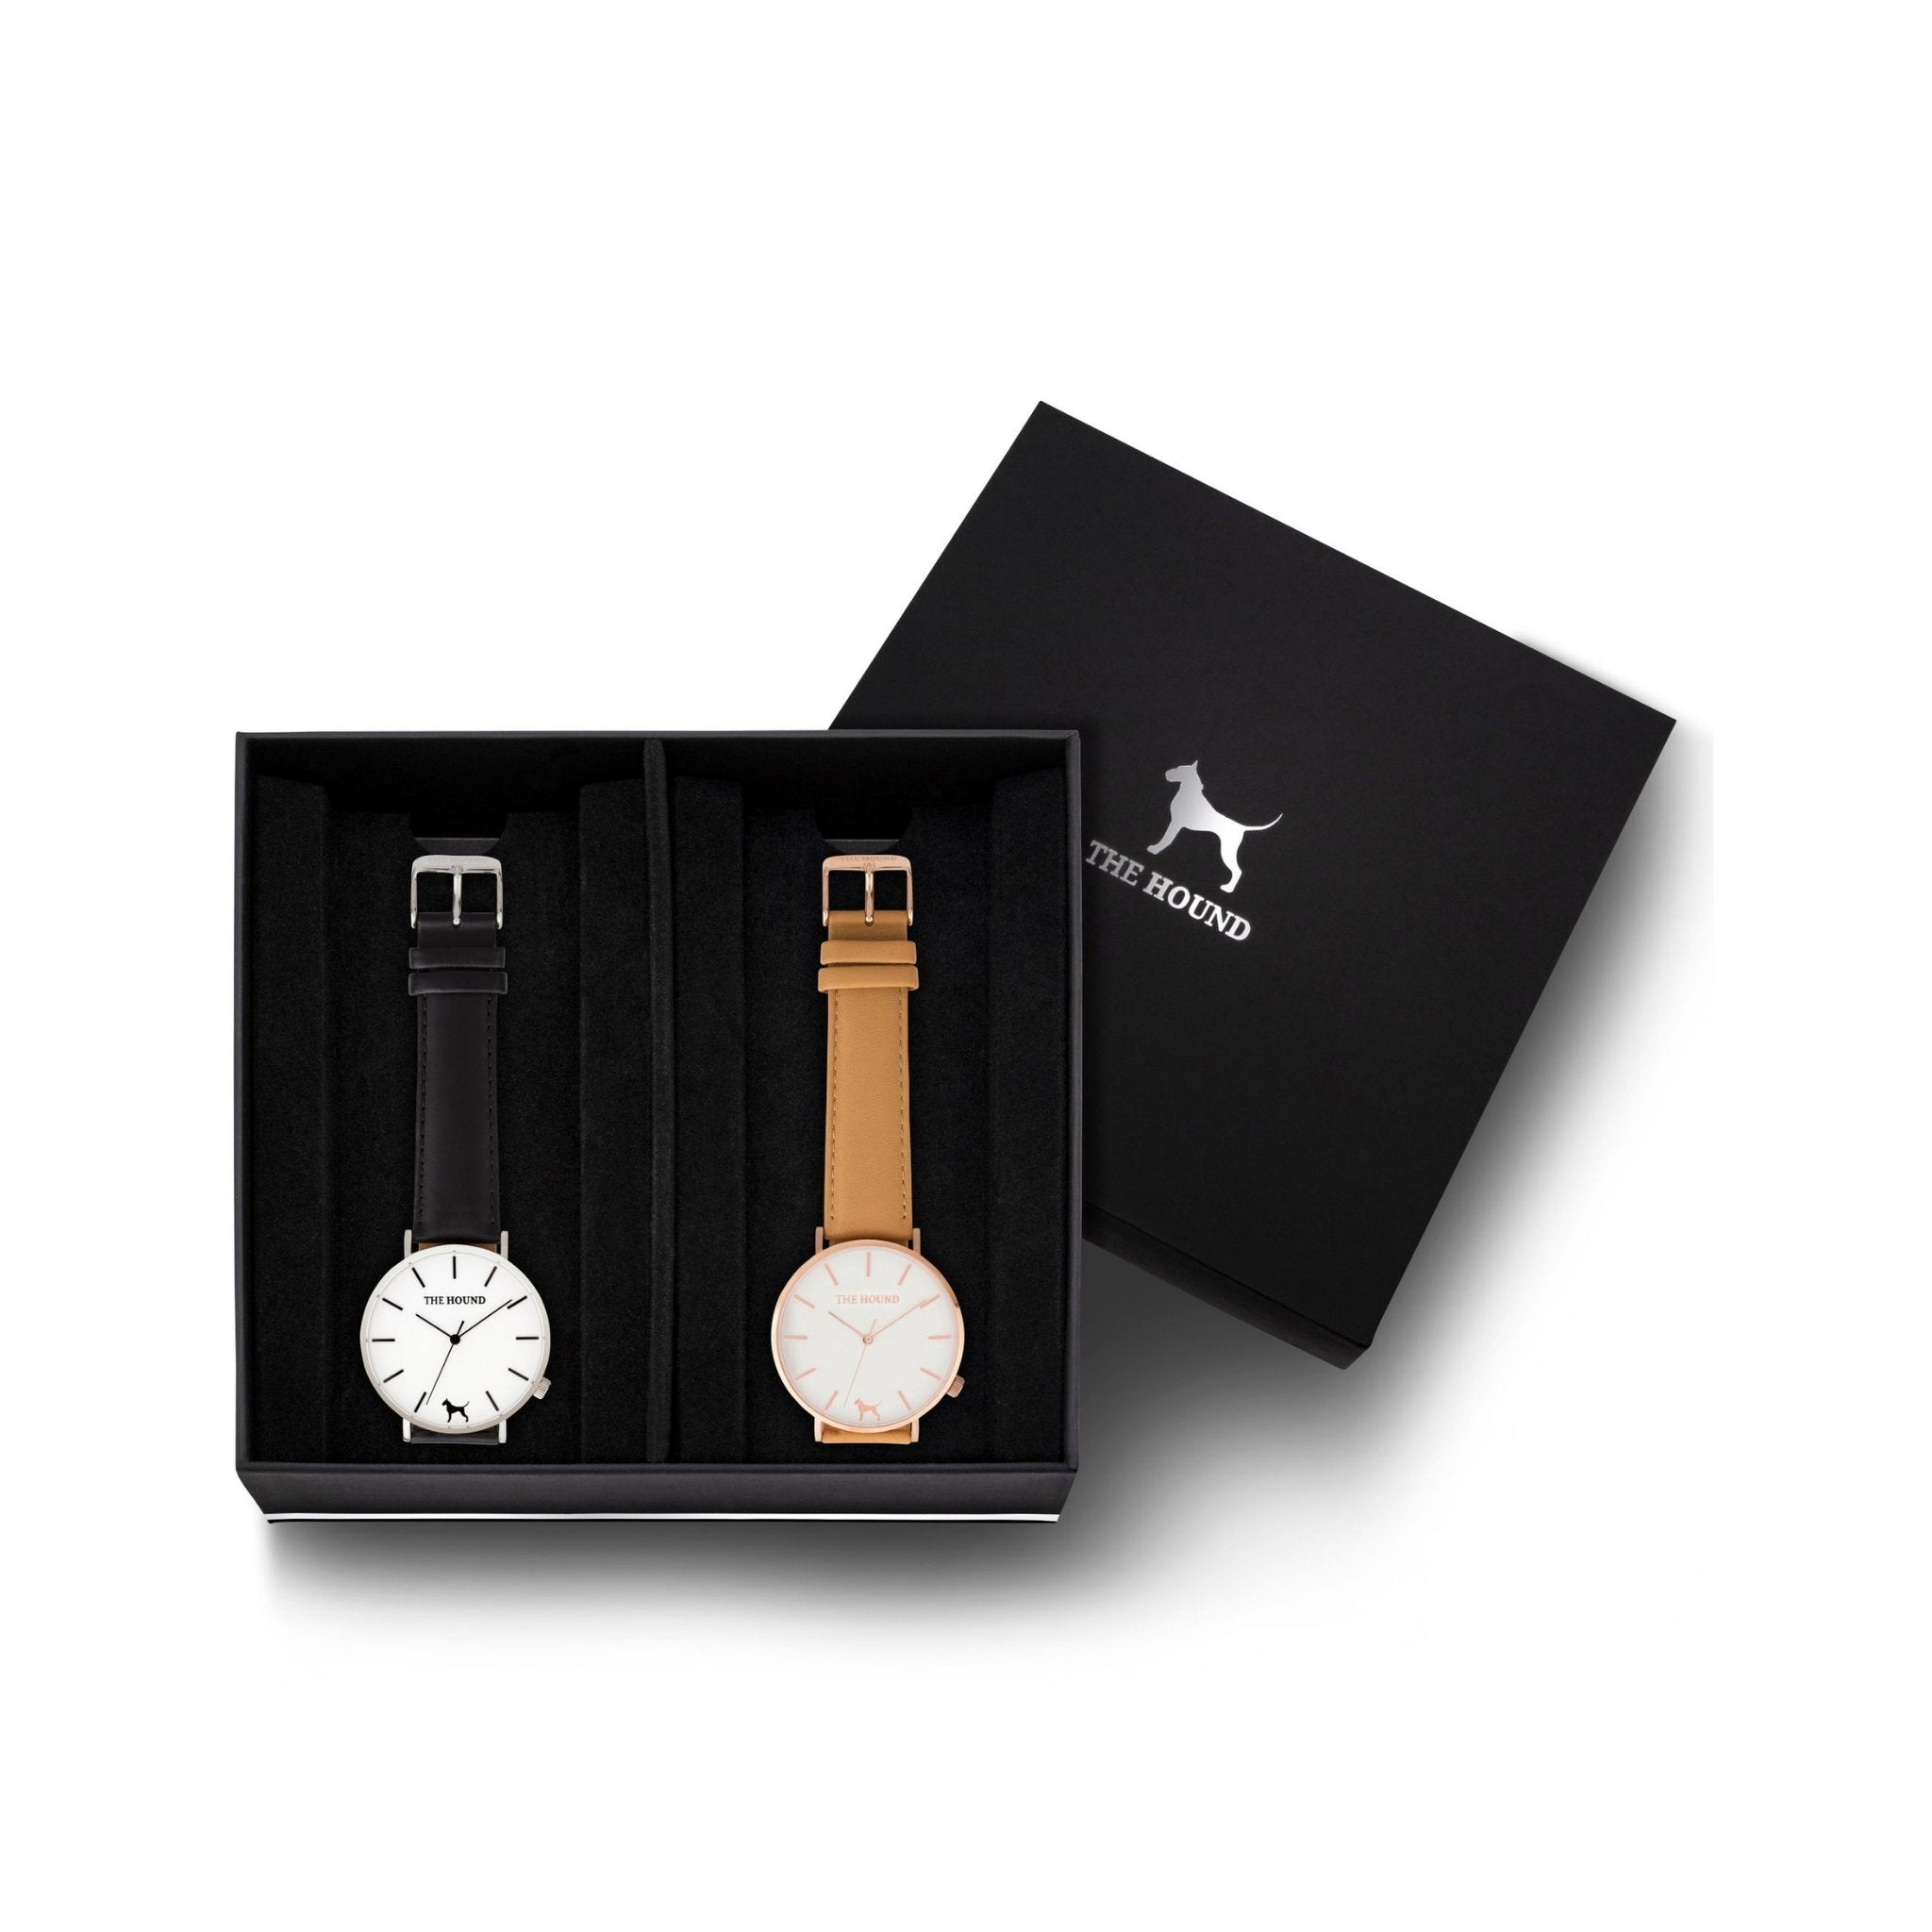 Custom gift set - Silver and white watch with stitched black genuine leather band and a rose gold and white watch with stitched camel genuine leather band